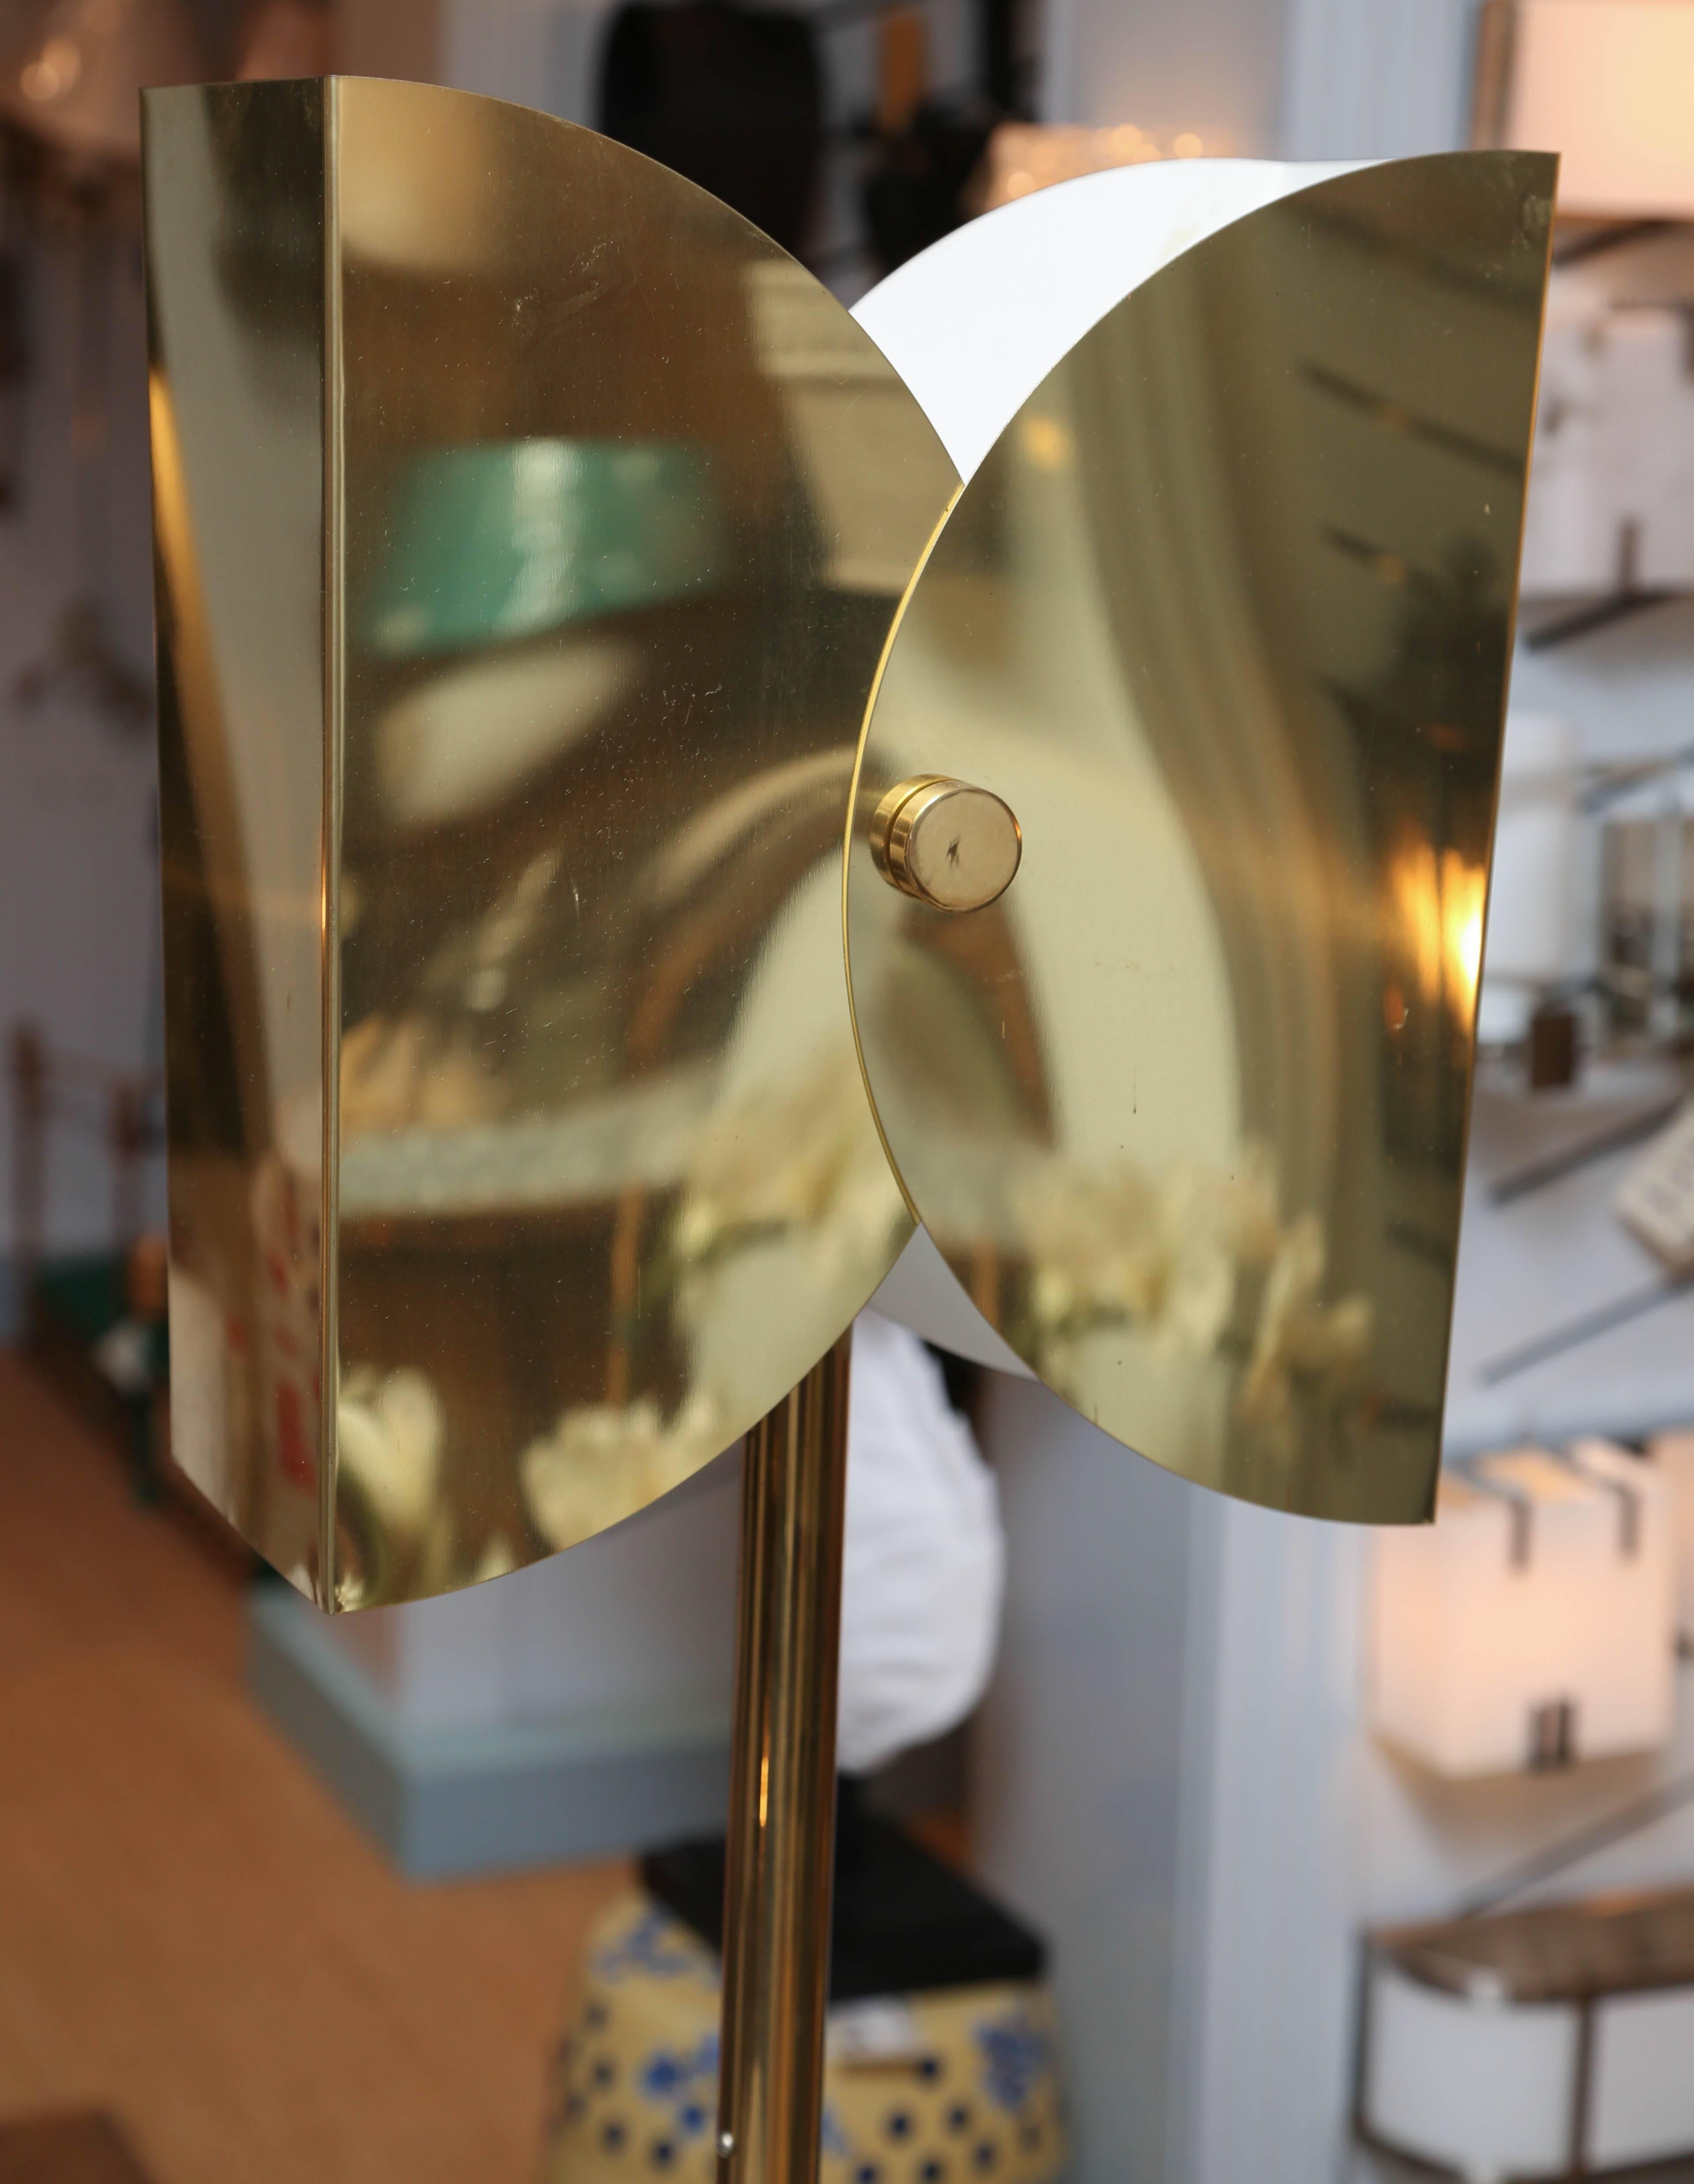 Superb vintage floor lamp in brass with a vectored hood by Koch & Lowy.